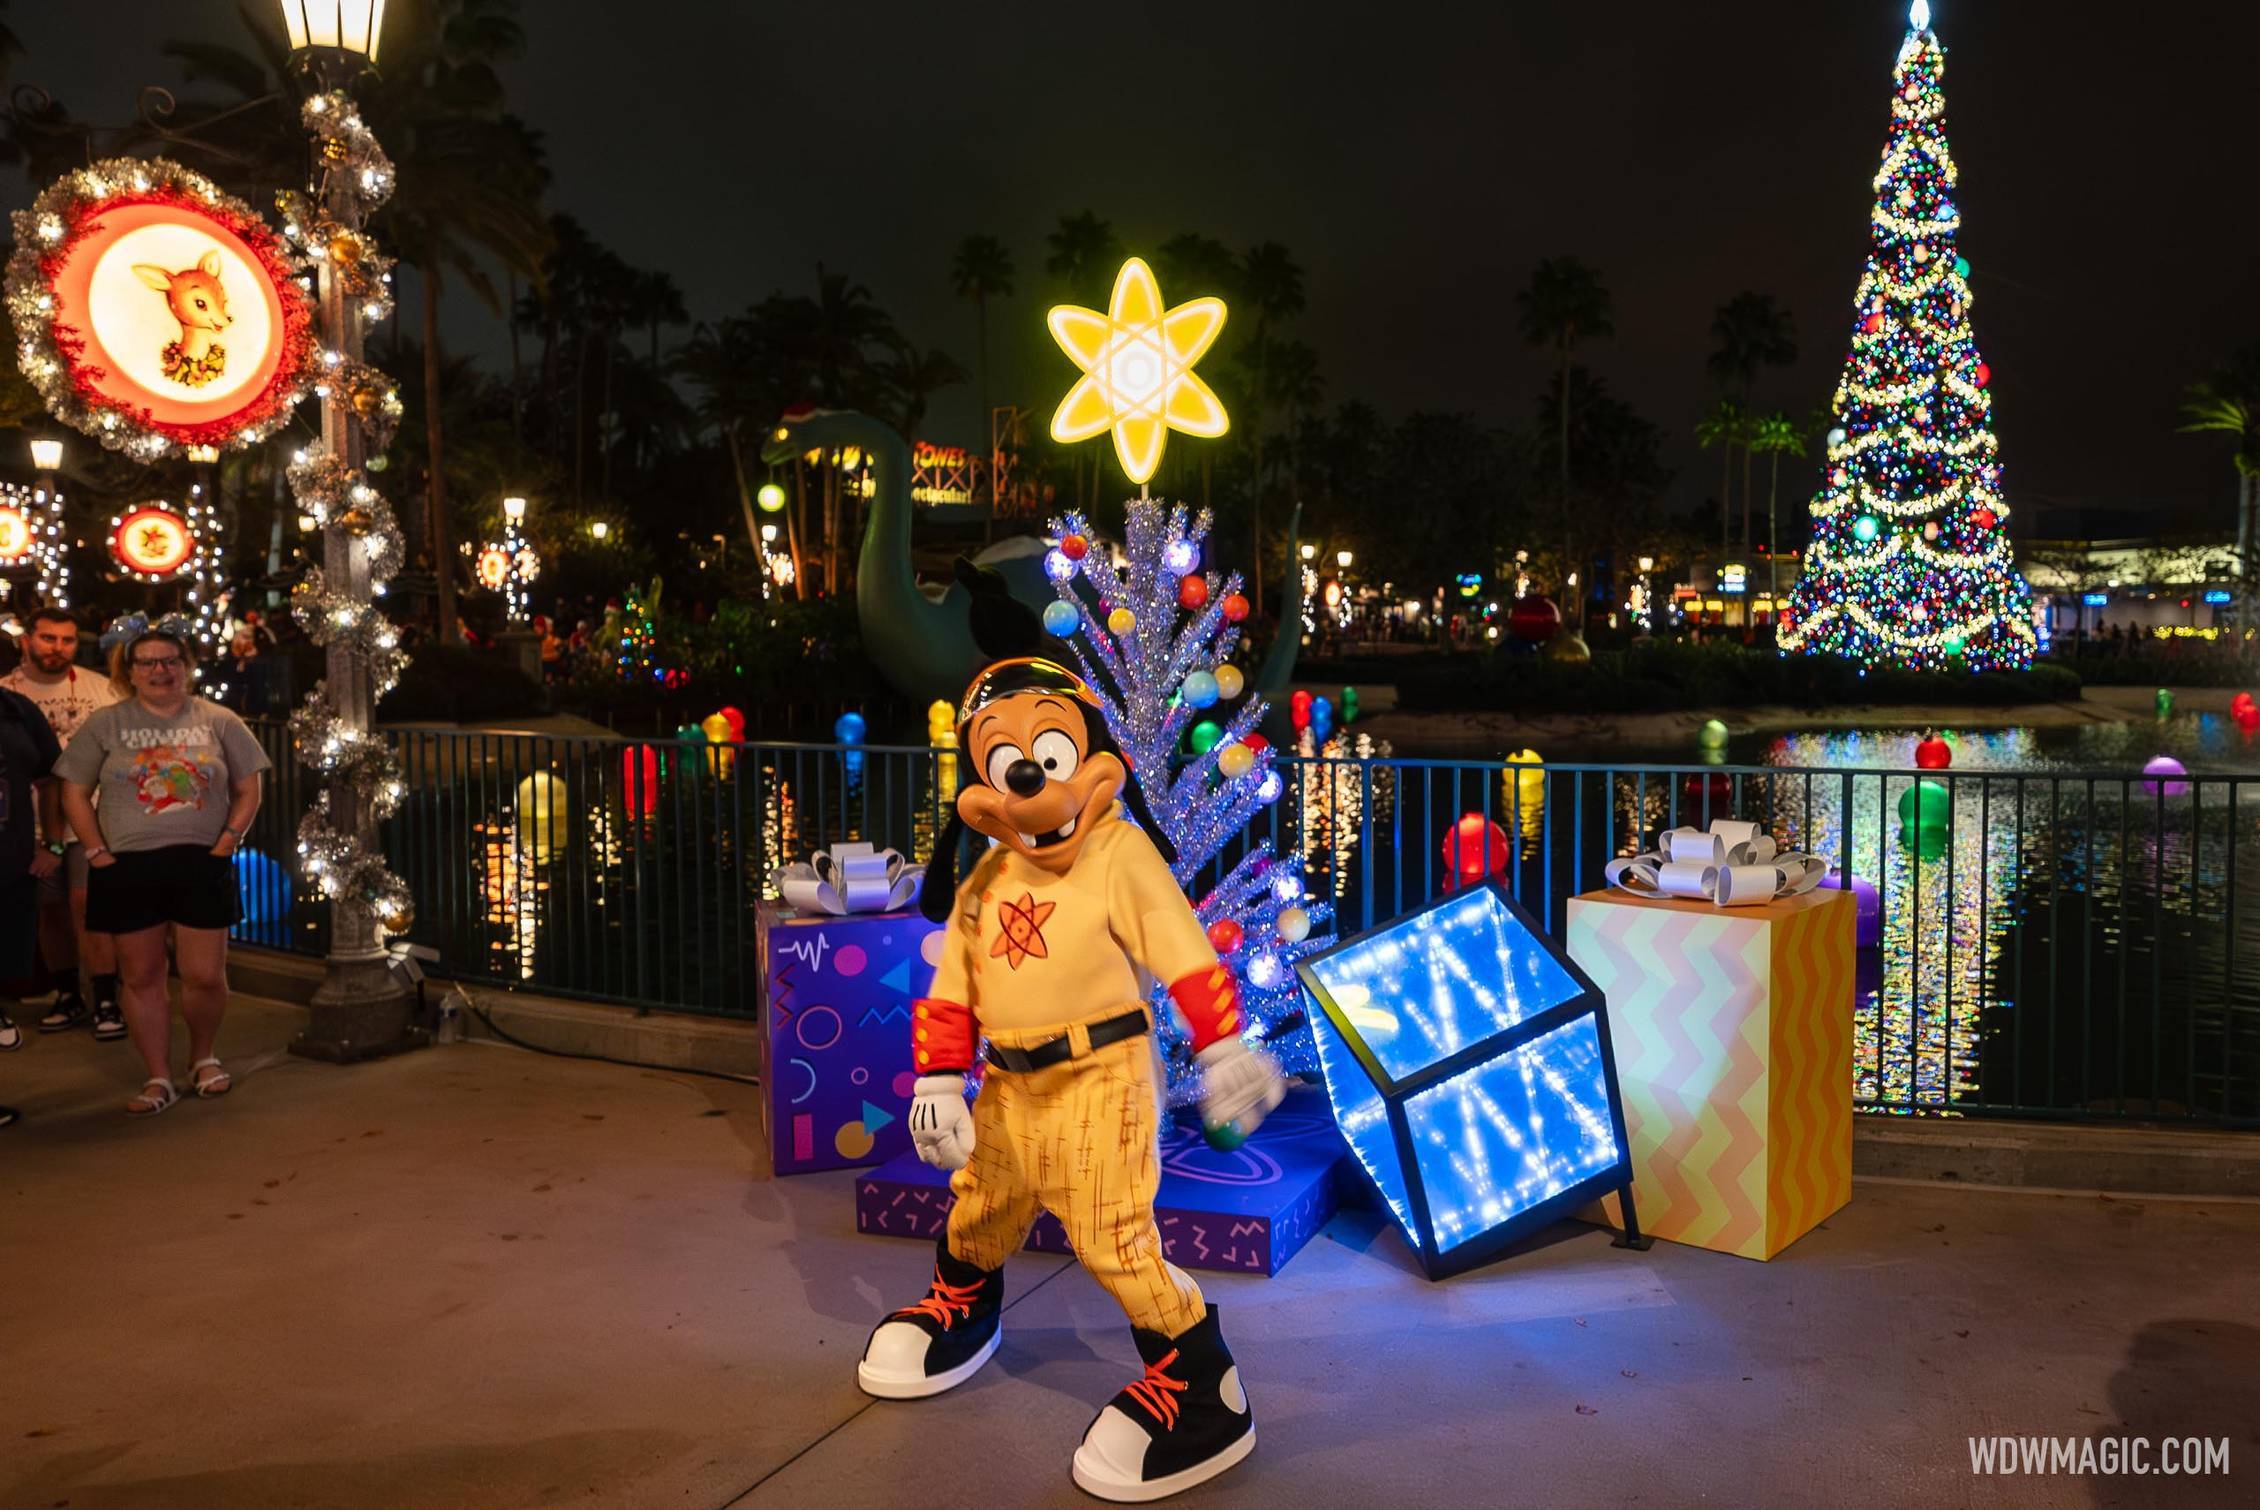 Changes made to Disney Jollywood Nights aim to fix the problems from opening  night